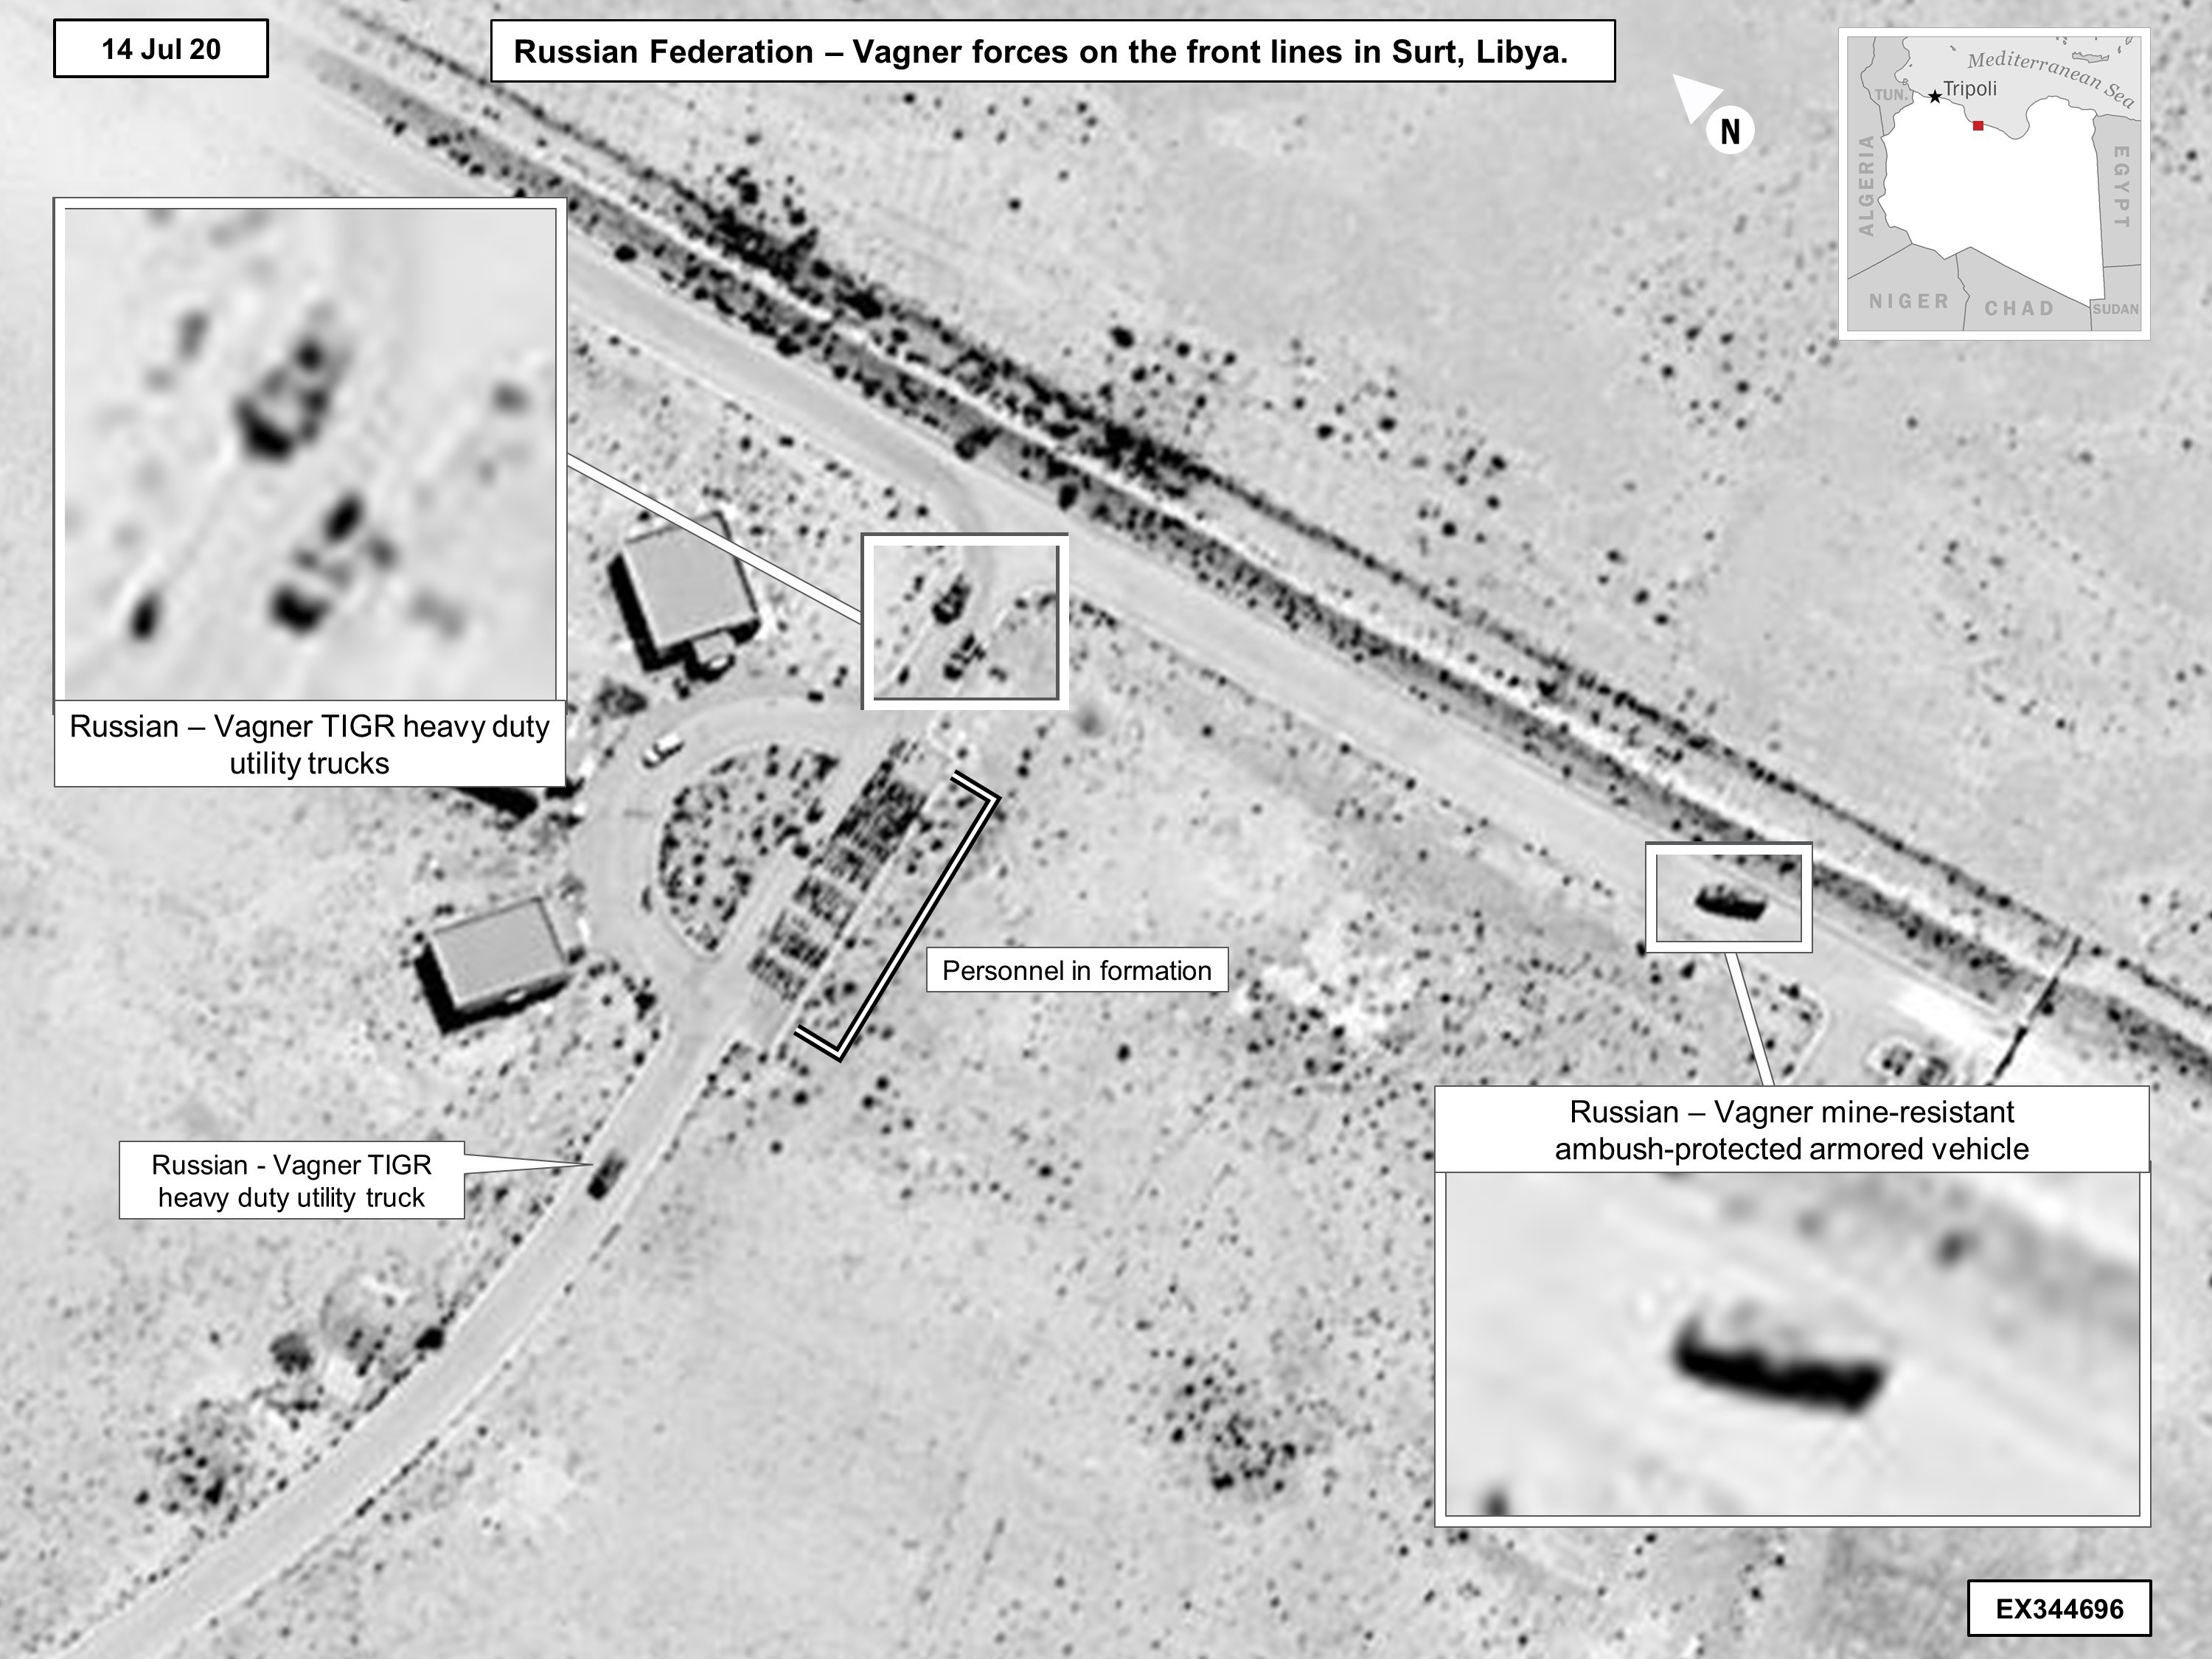 US satellite imagery released by Africom on 24 July reportedly shows Russian military equipment deployed on the frontlines of Sirte, Libya (Africom)